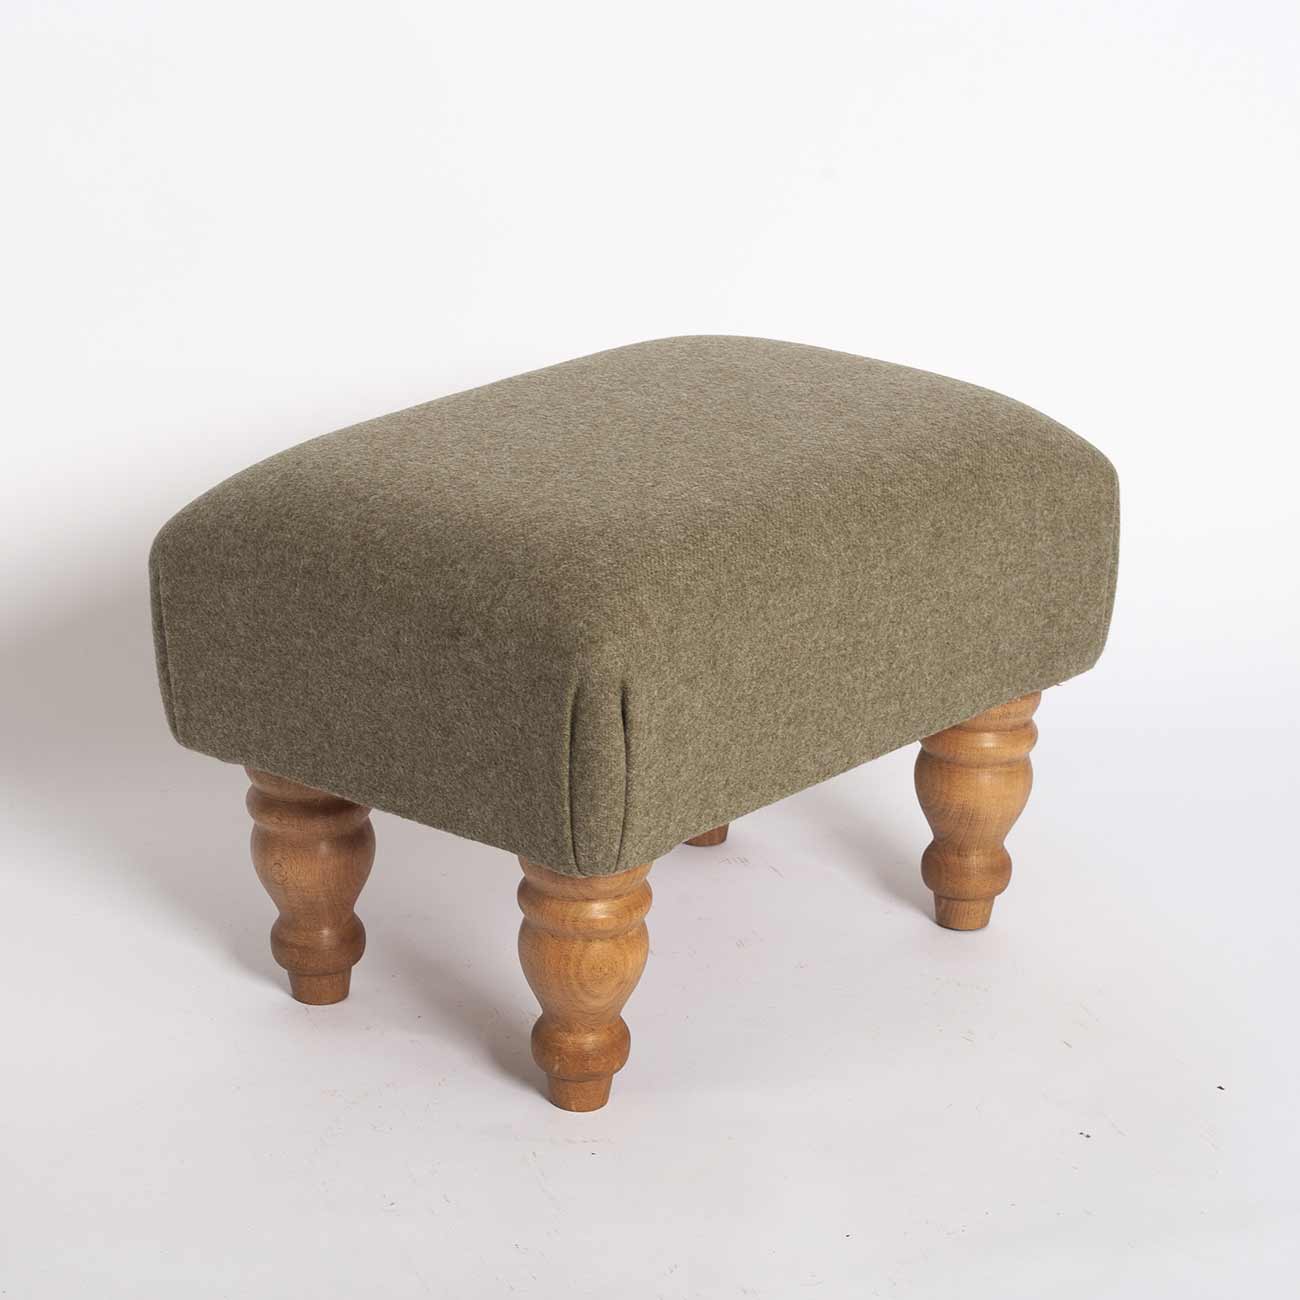 Willow Footstools